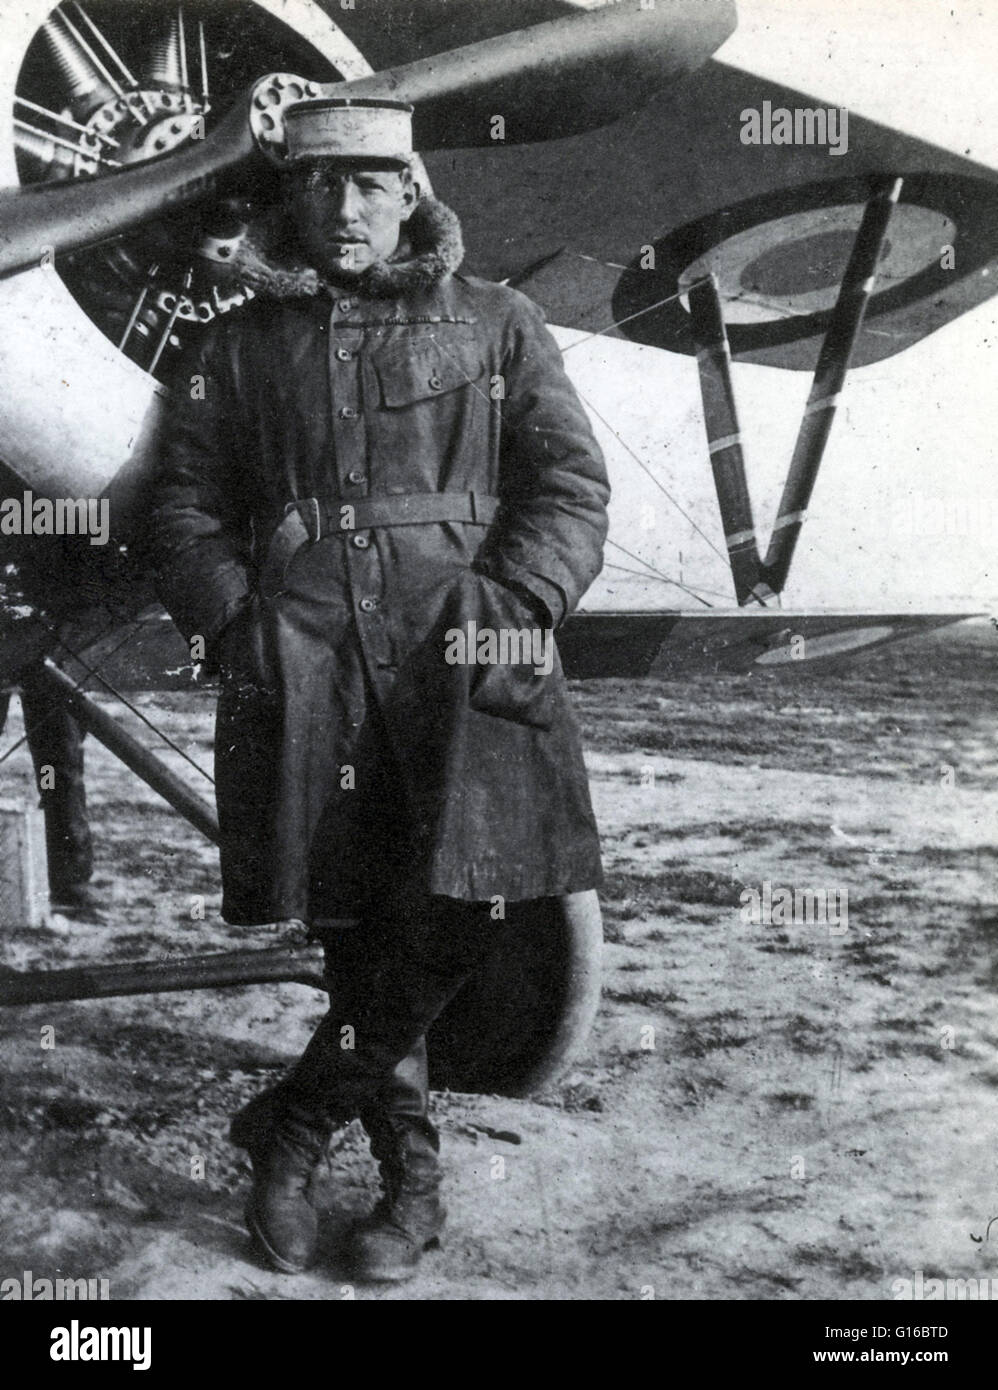 Charles Eugène Jules Marie Nungesser (March 15, 1892 - May 8, 1927) was a First World War French flying ace rating third highest in the country for air combat victories. He travelled to South America where he worked as an auto mechanic before becoming a p Stock Photo